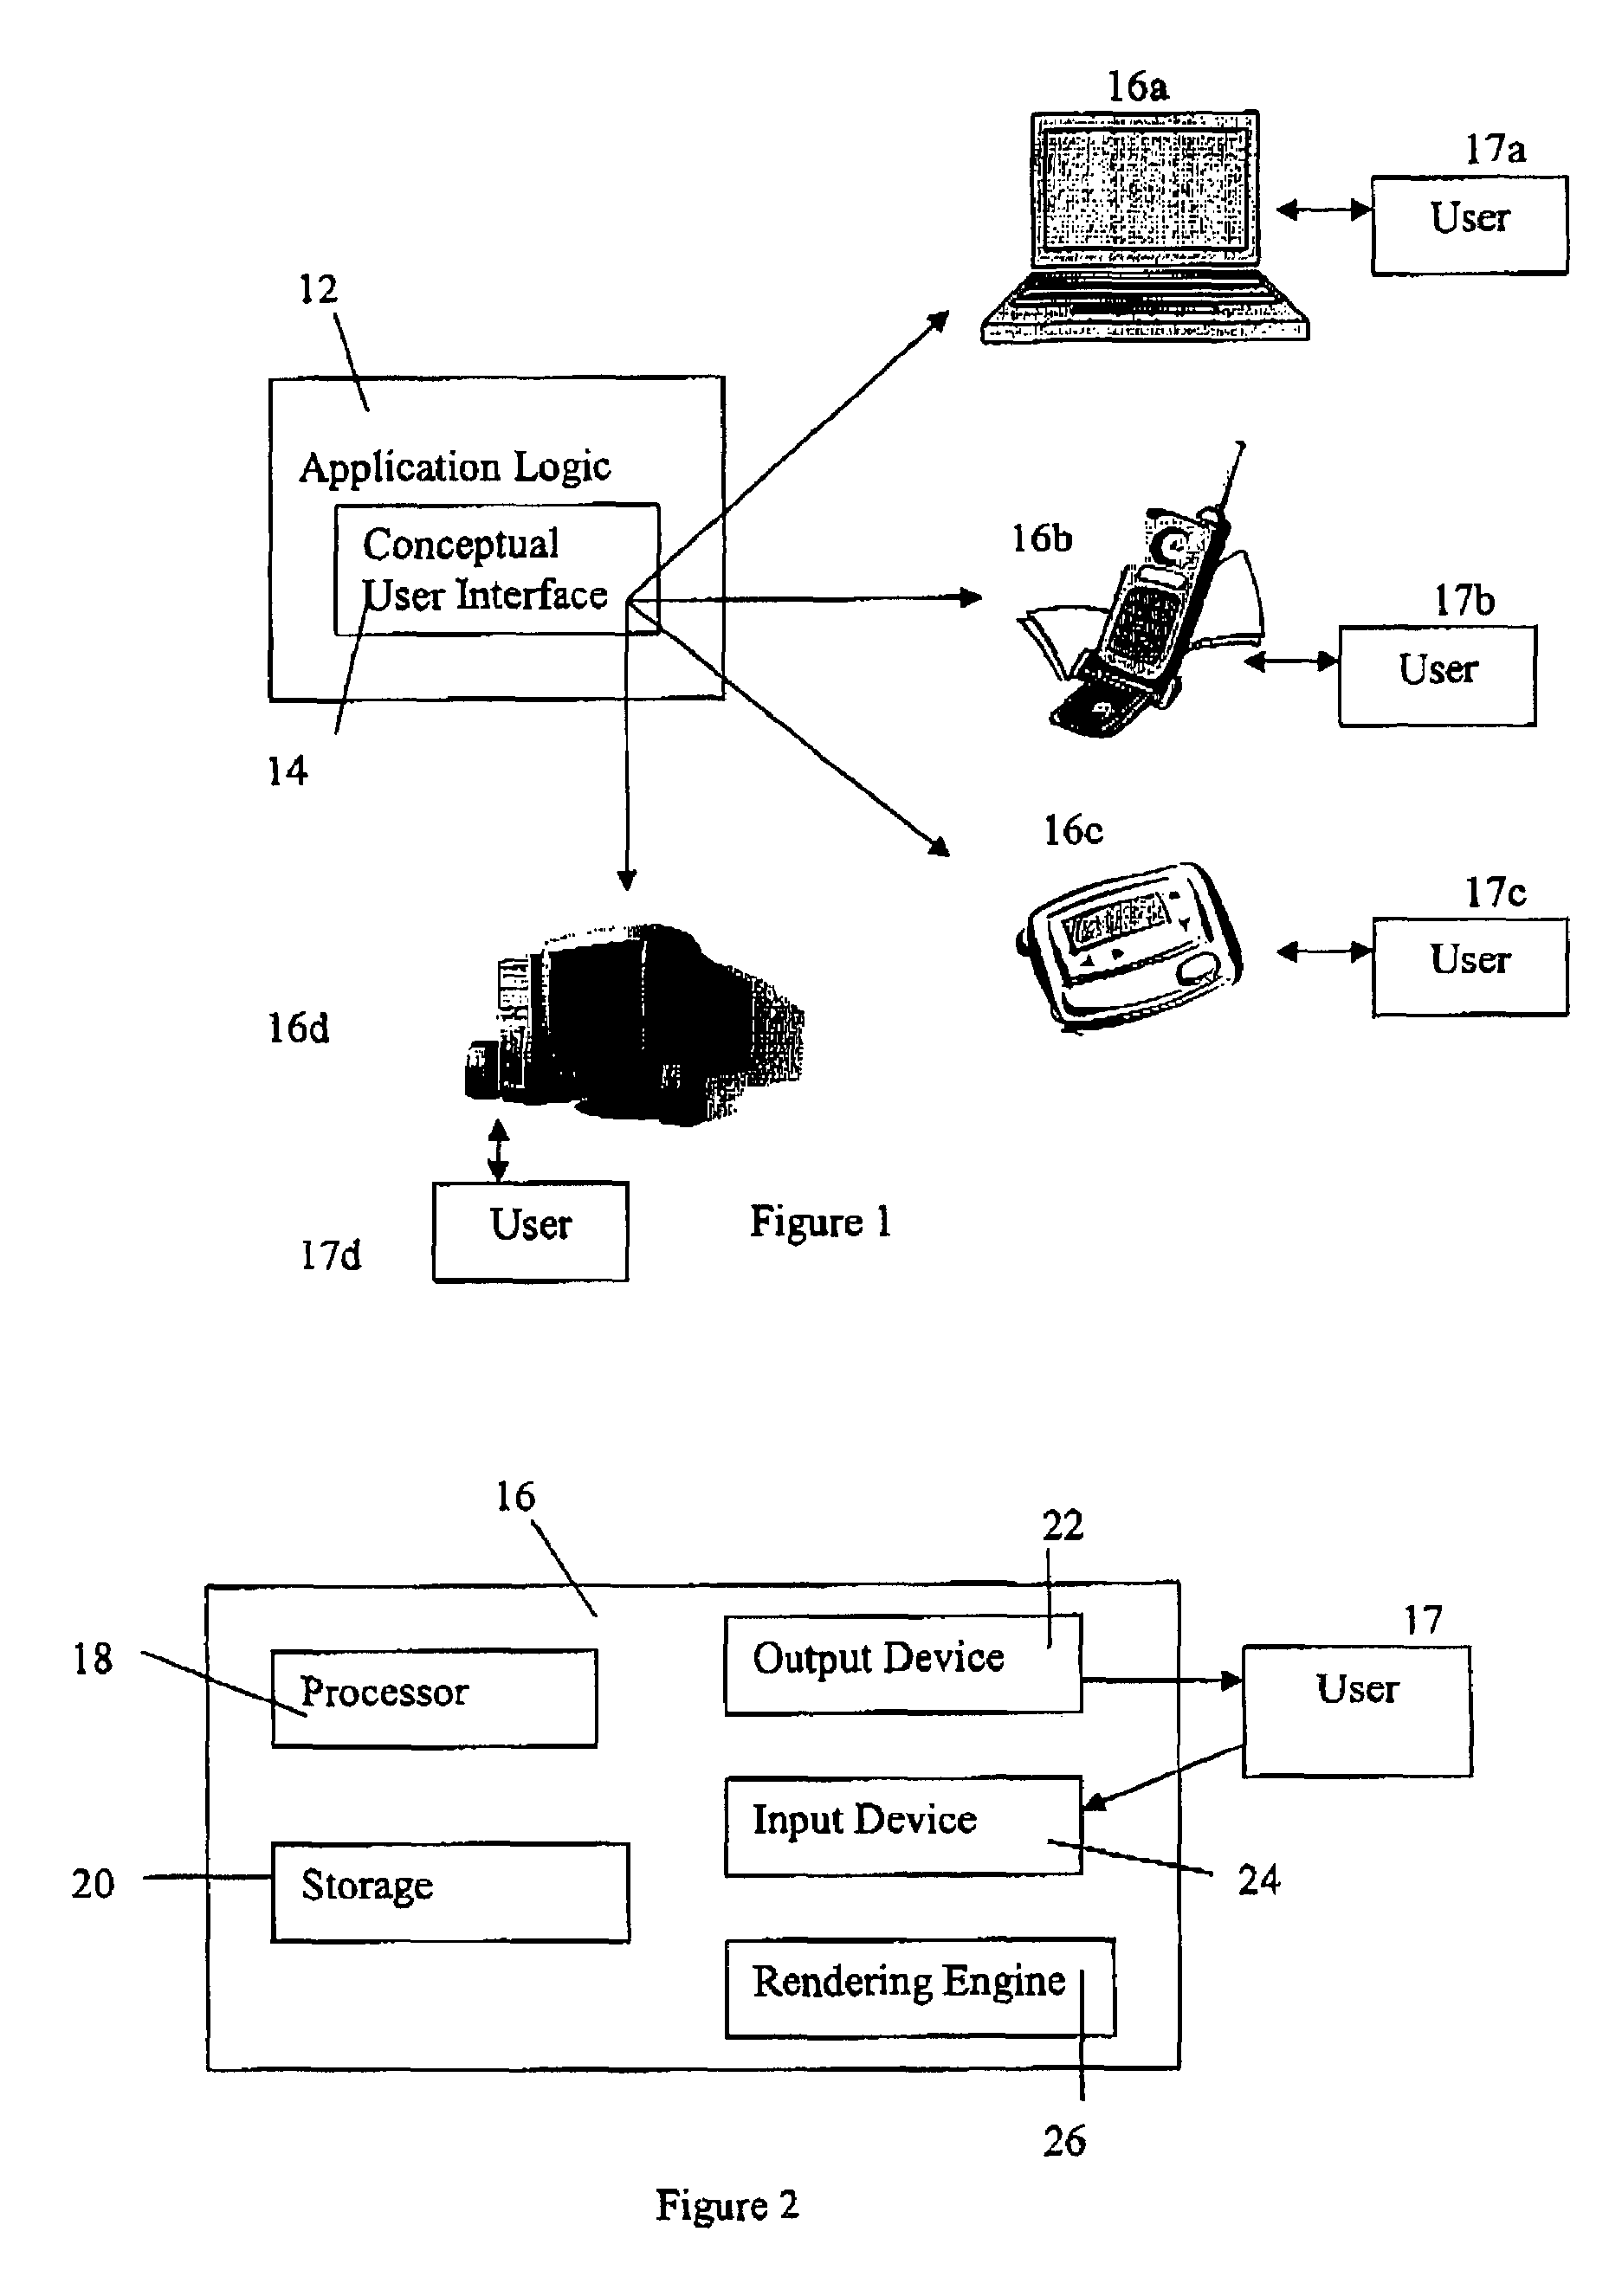 Method and apparatus for designing, rendering and programming a user interface